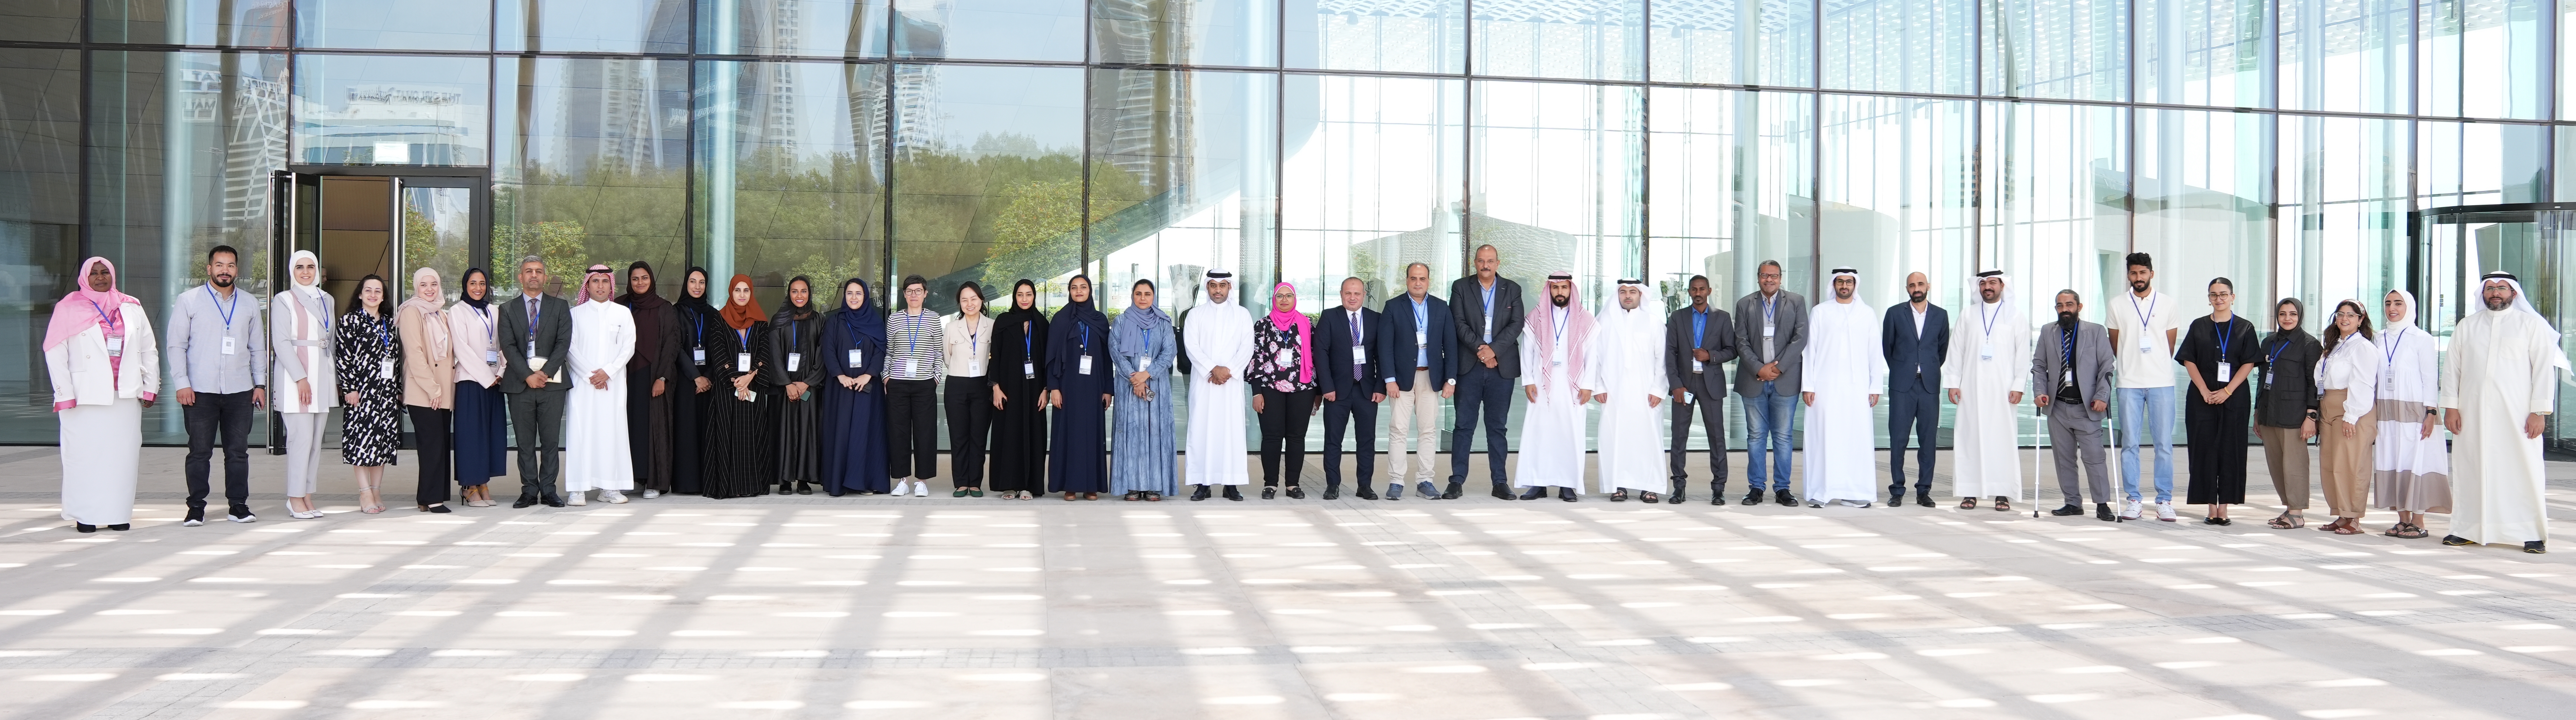 Capacity Building Programme on Improving Management Effectiveness of World Heritage Properties launched in the Arab States Region